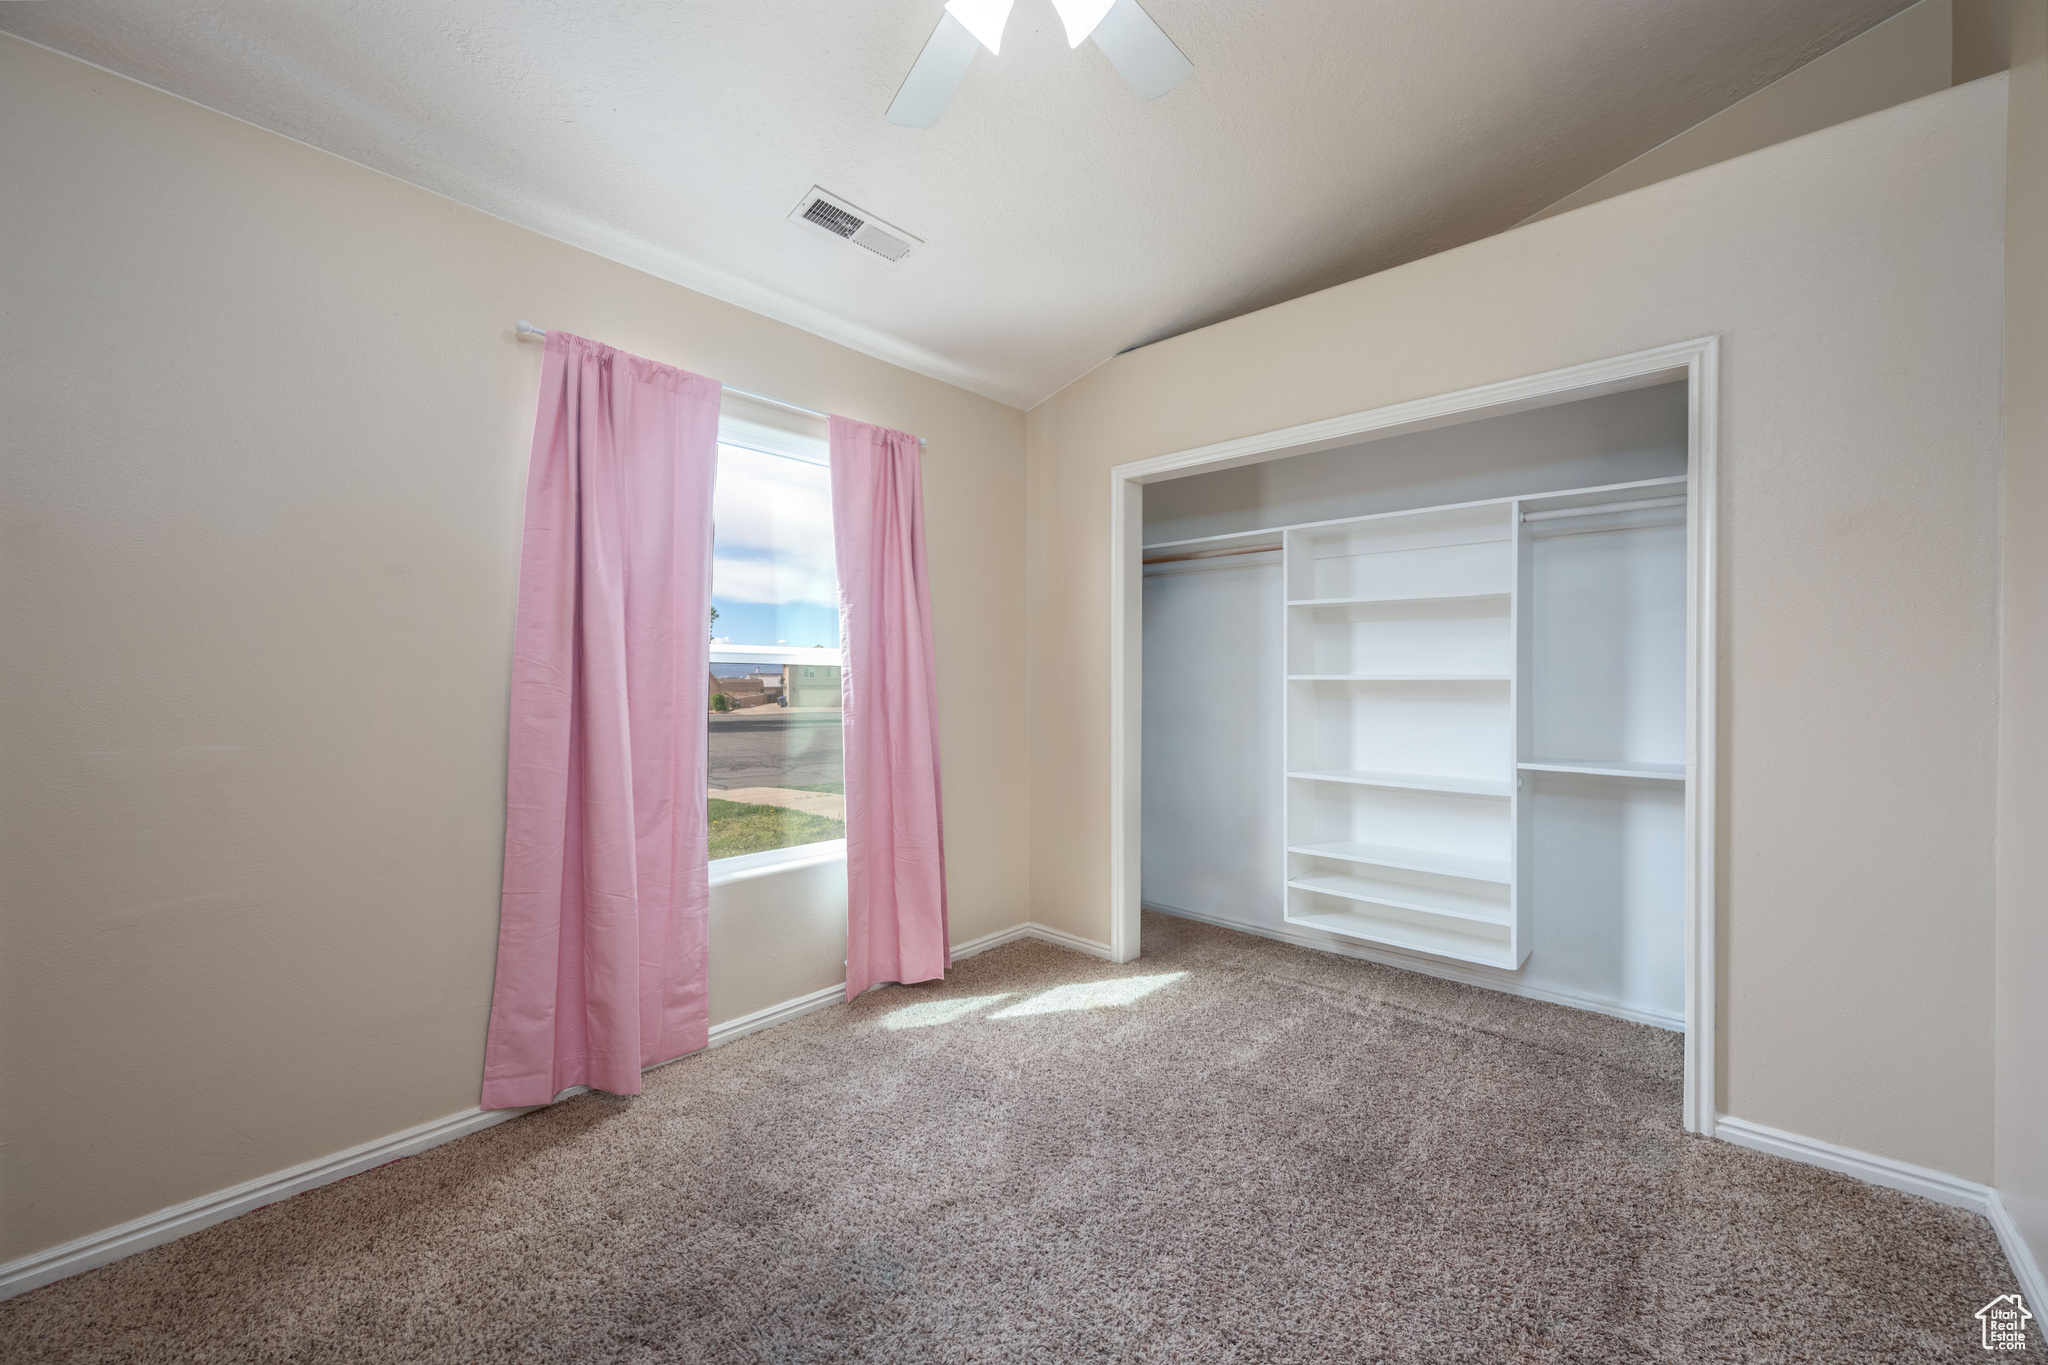 Unfurnished bedroom with a closet, ceiling fan, vaulted ceiling, and light carpet